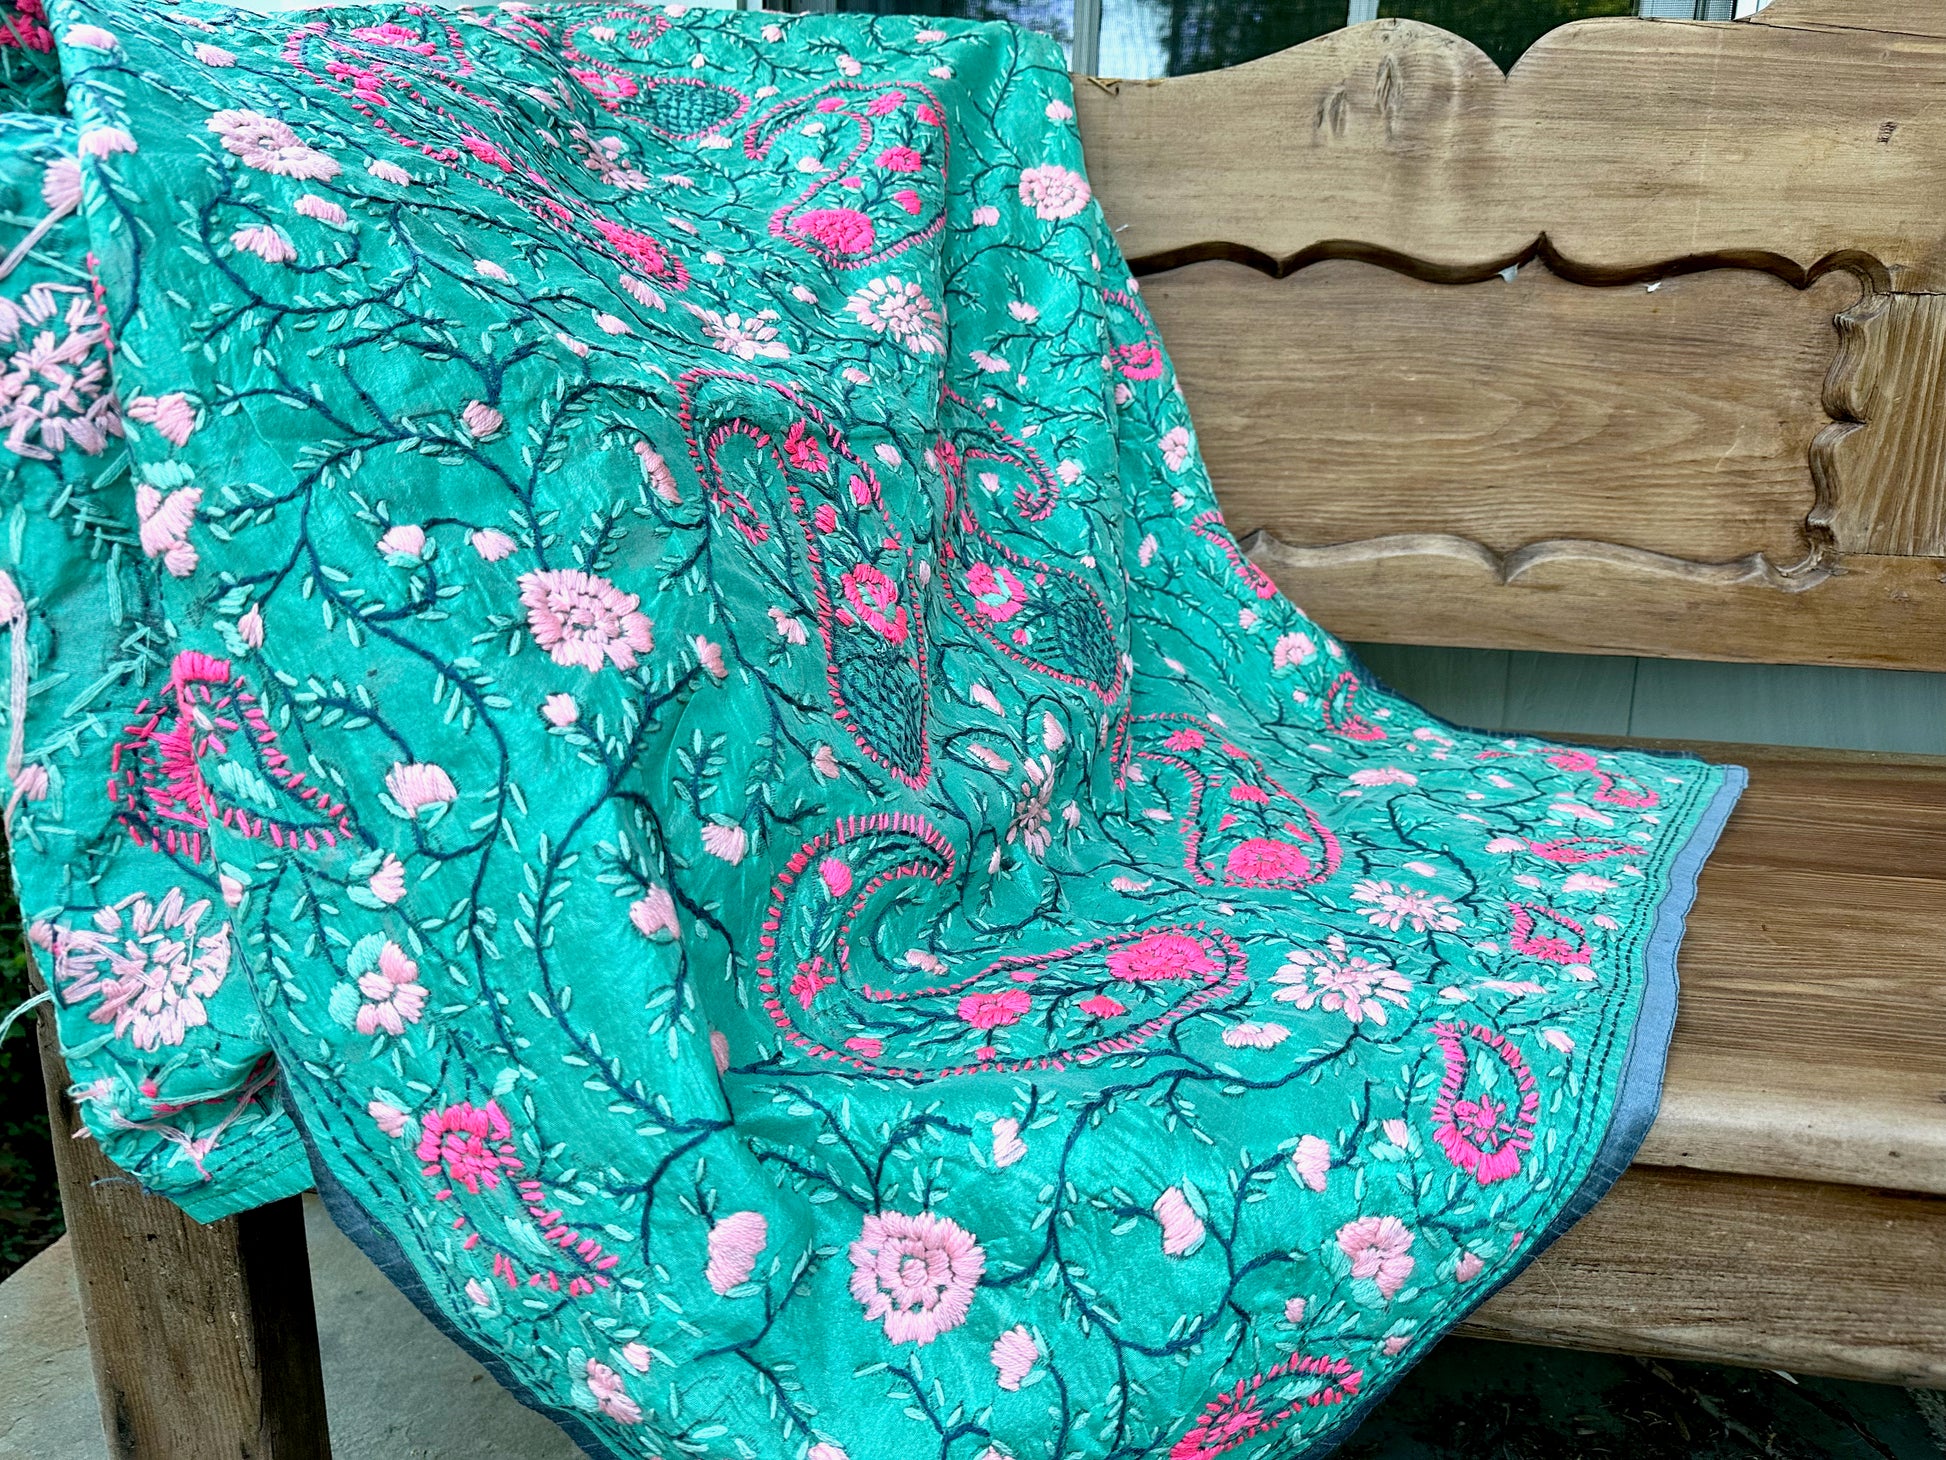 Honor Your Mom with a Special Gift this Mother's Day I Turquoise I Evening Wrap I Mothers Day Gift I  Embroidery Shawls I Formal Evening Wrap - DharBazaar